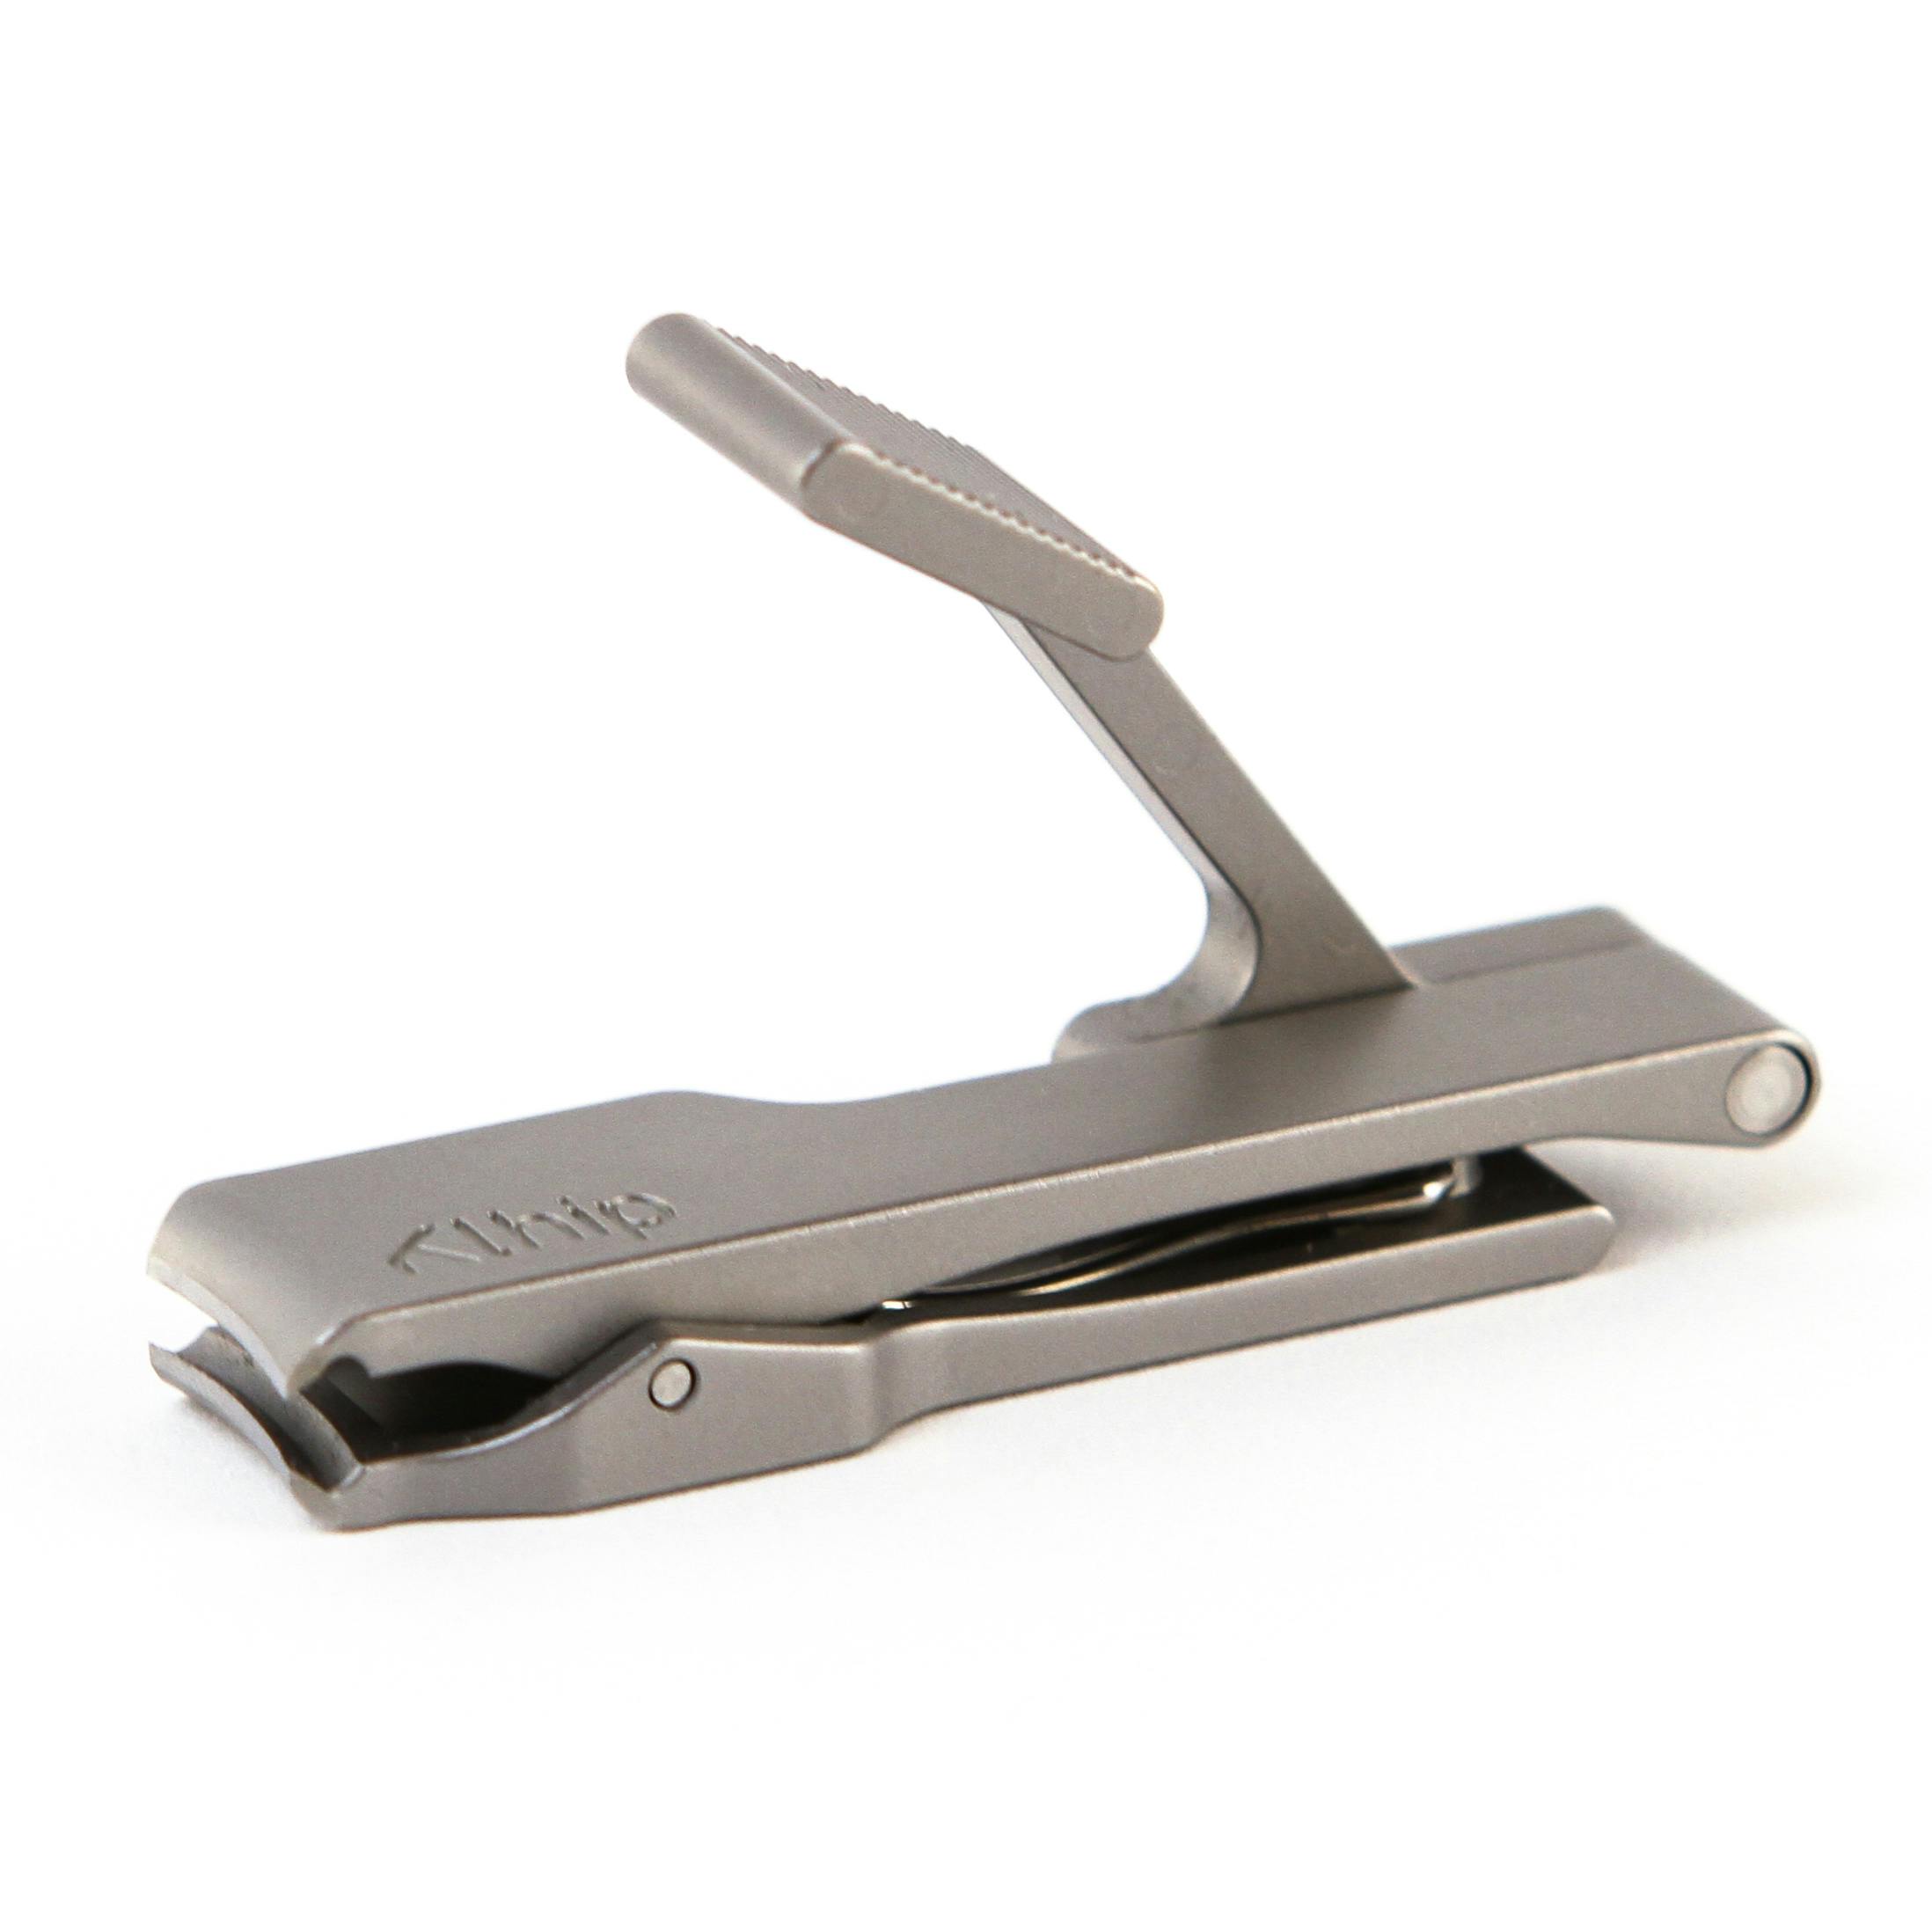 Klhip Nail clipper, The Ultimate clipper, Genuine Product, Made in Japan, Good Design Award